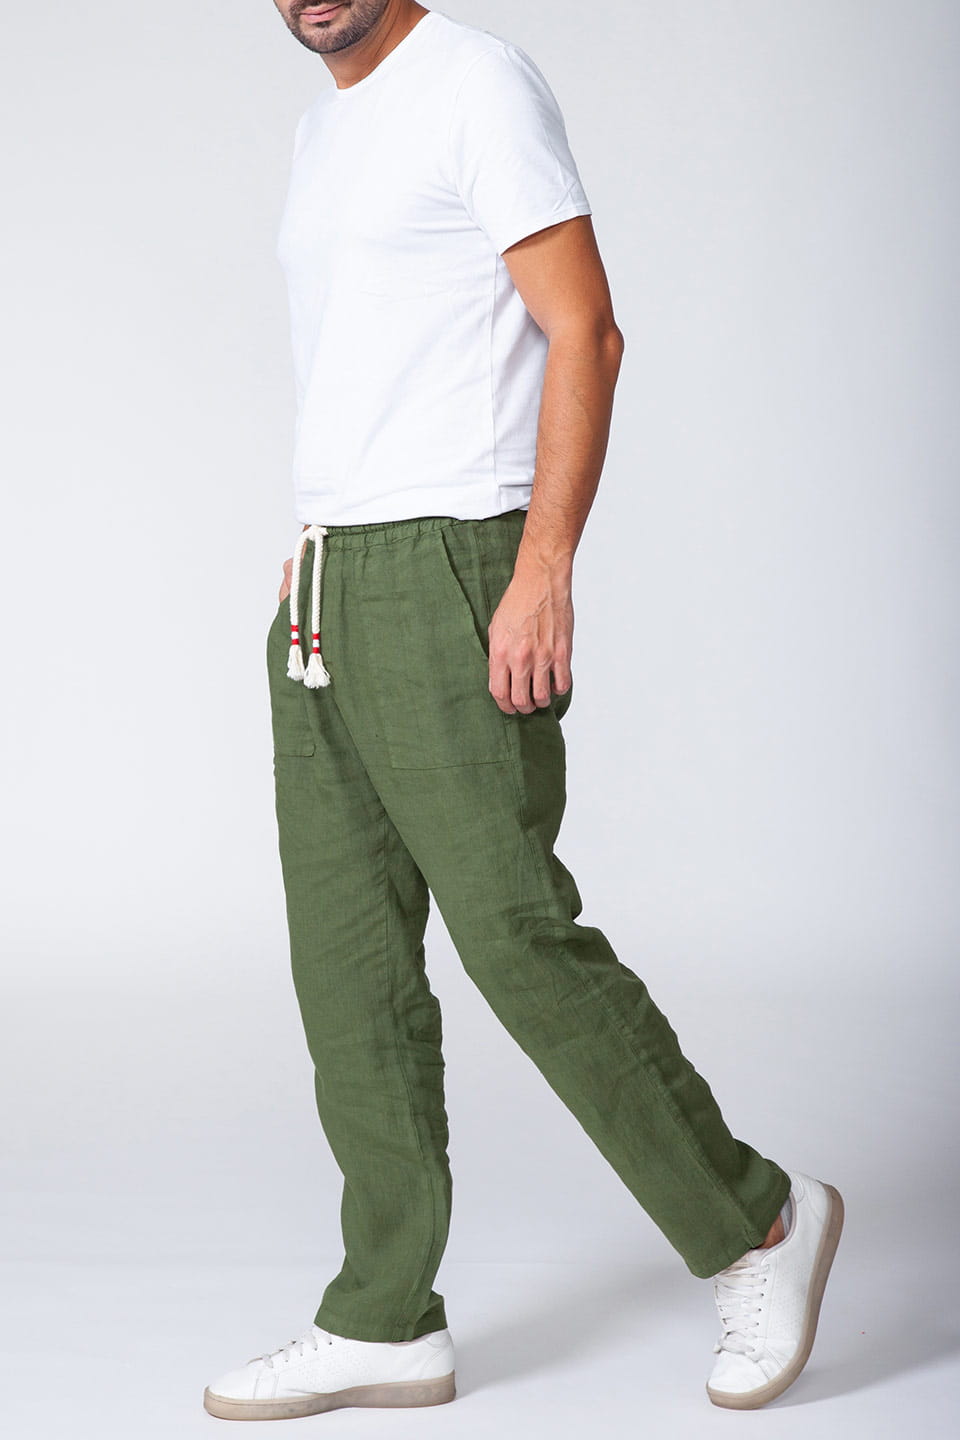 MC saint barth male calais trousers military side. Product gallery 1